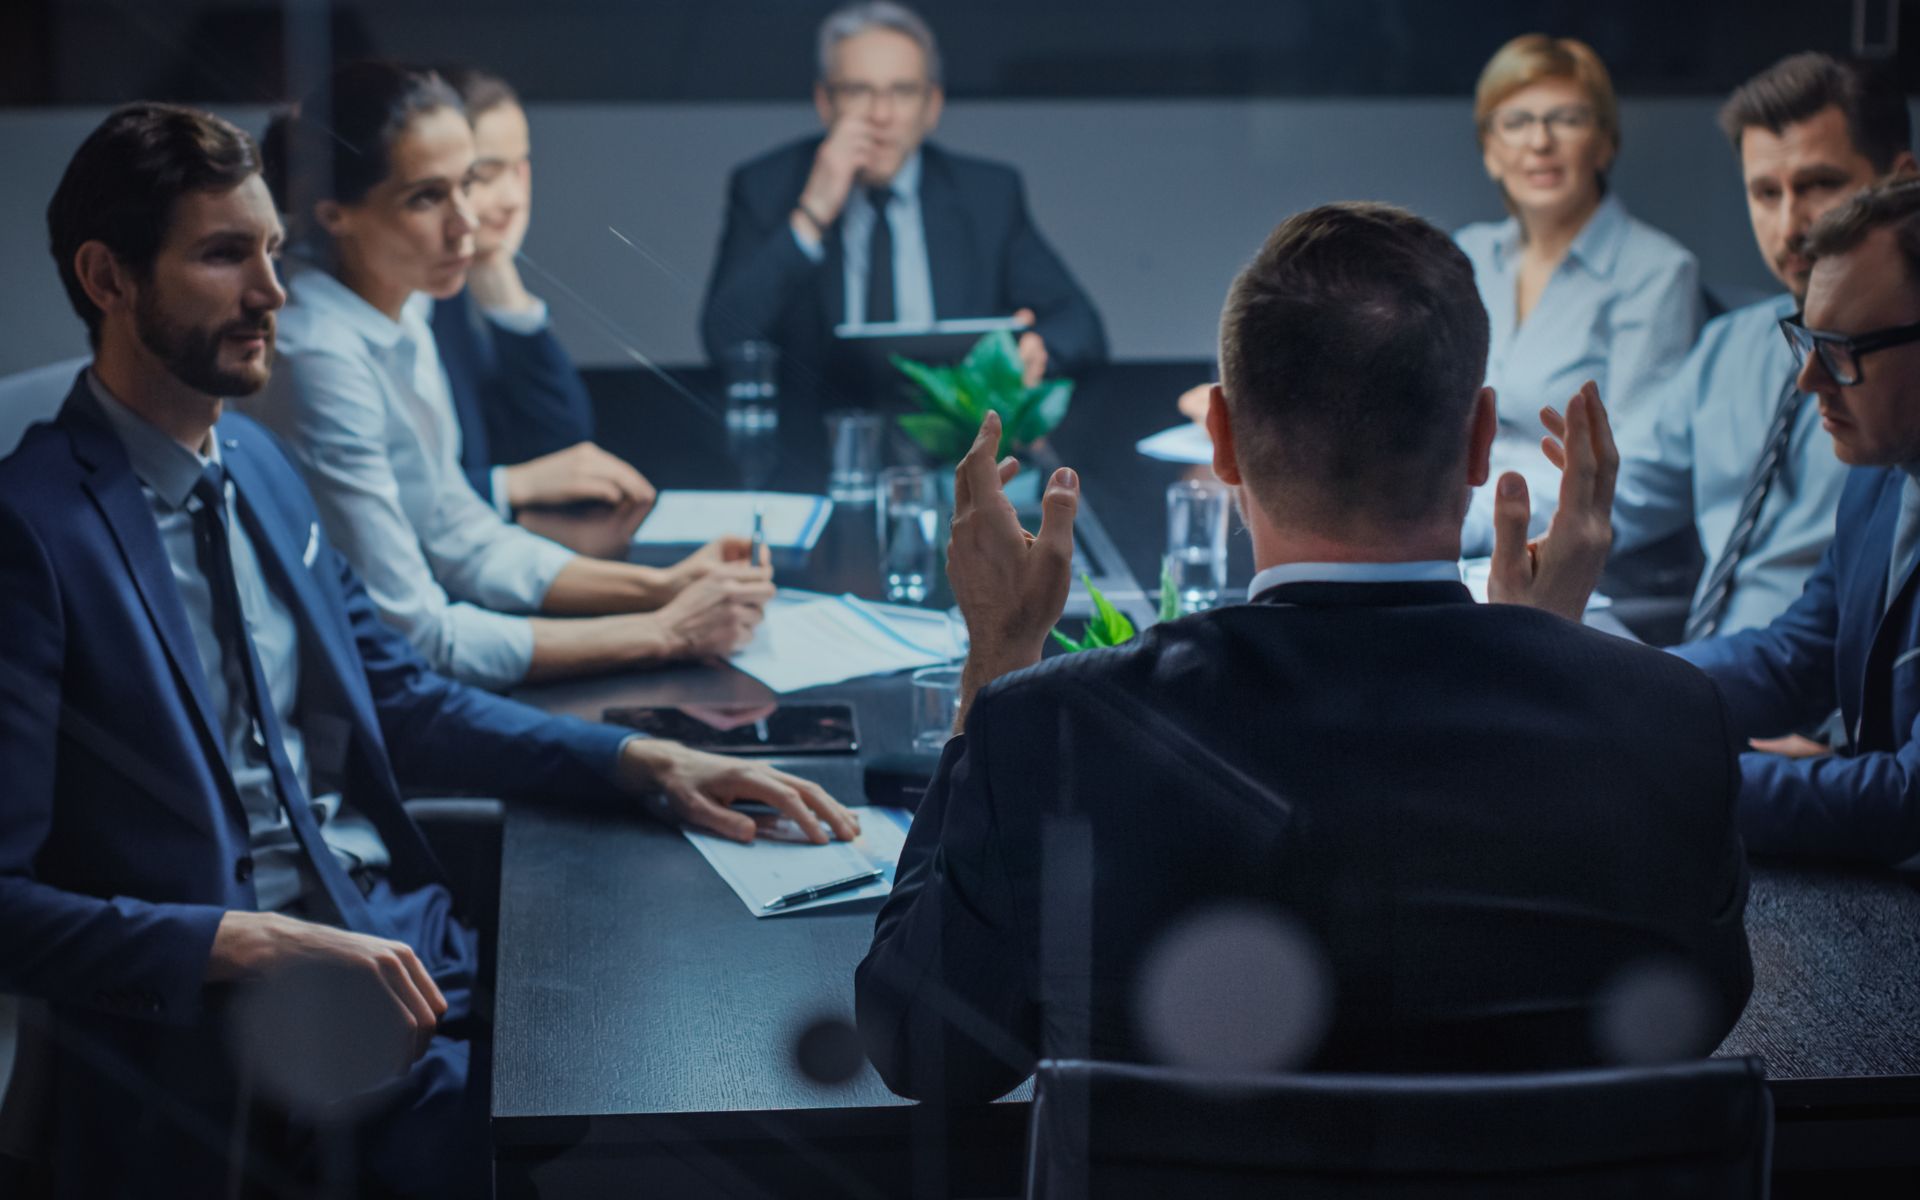 Cybersecurity Training for Boards of Directors